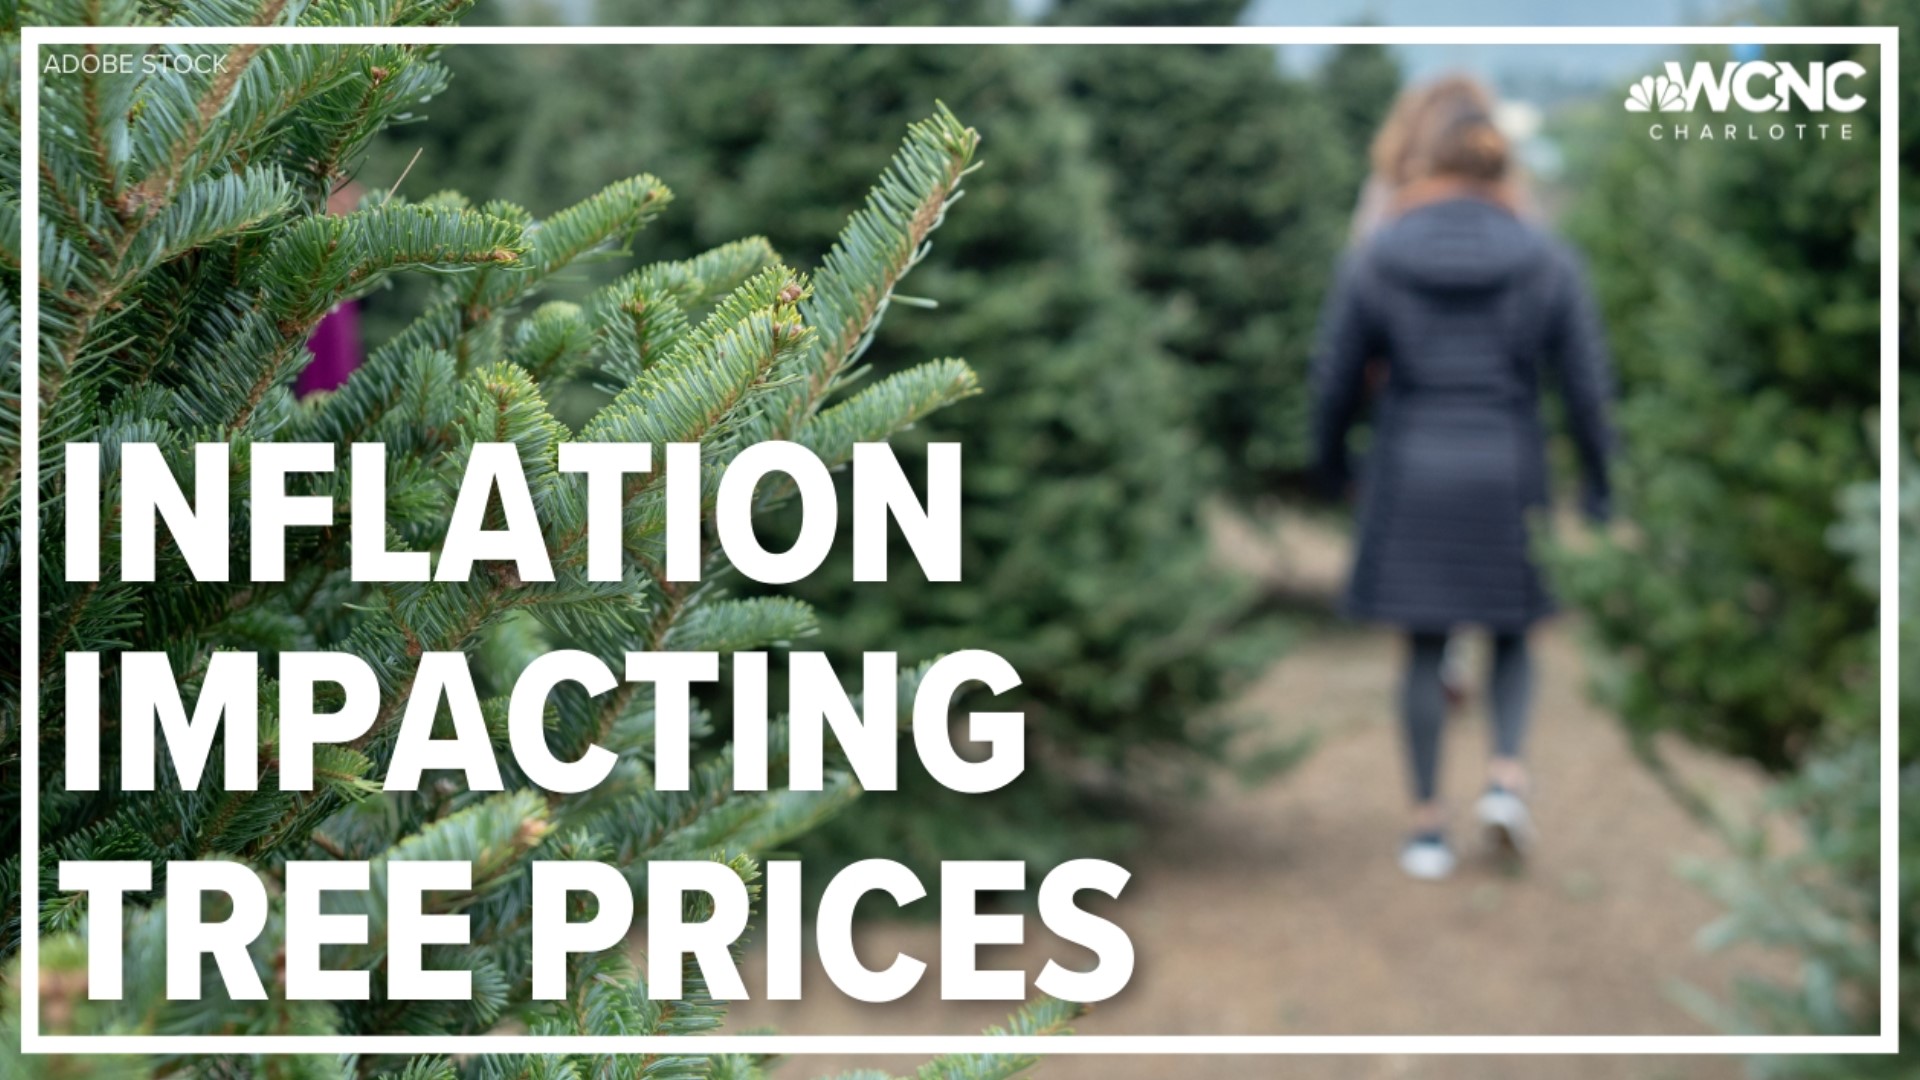 Experts estimate real Christmas trees will cost 10% to 15% more this year.